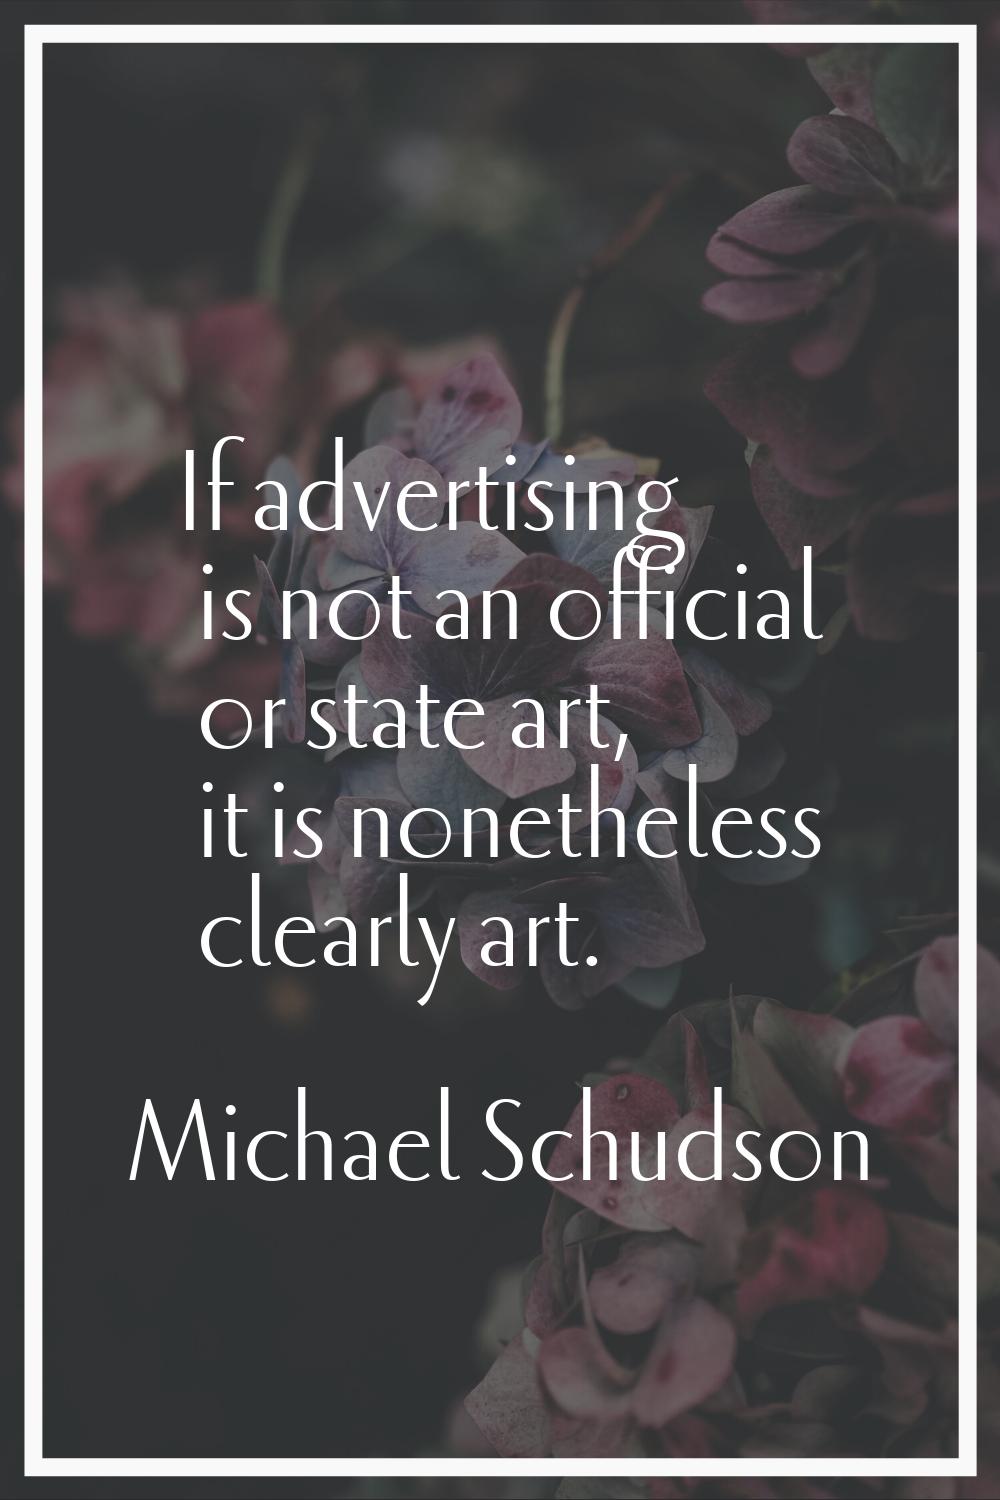 If advertising is not an official or state art, it is nonetheless clearly art.